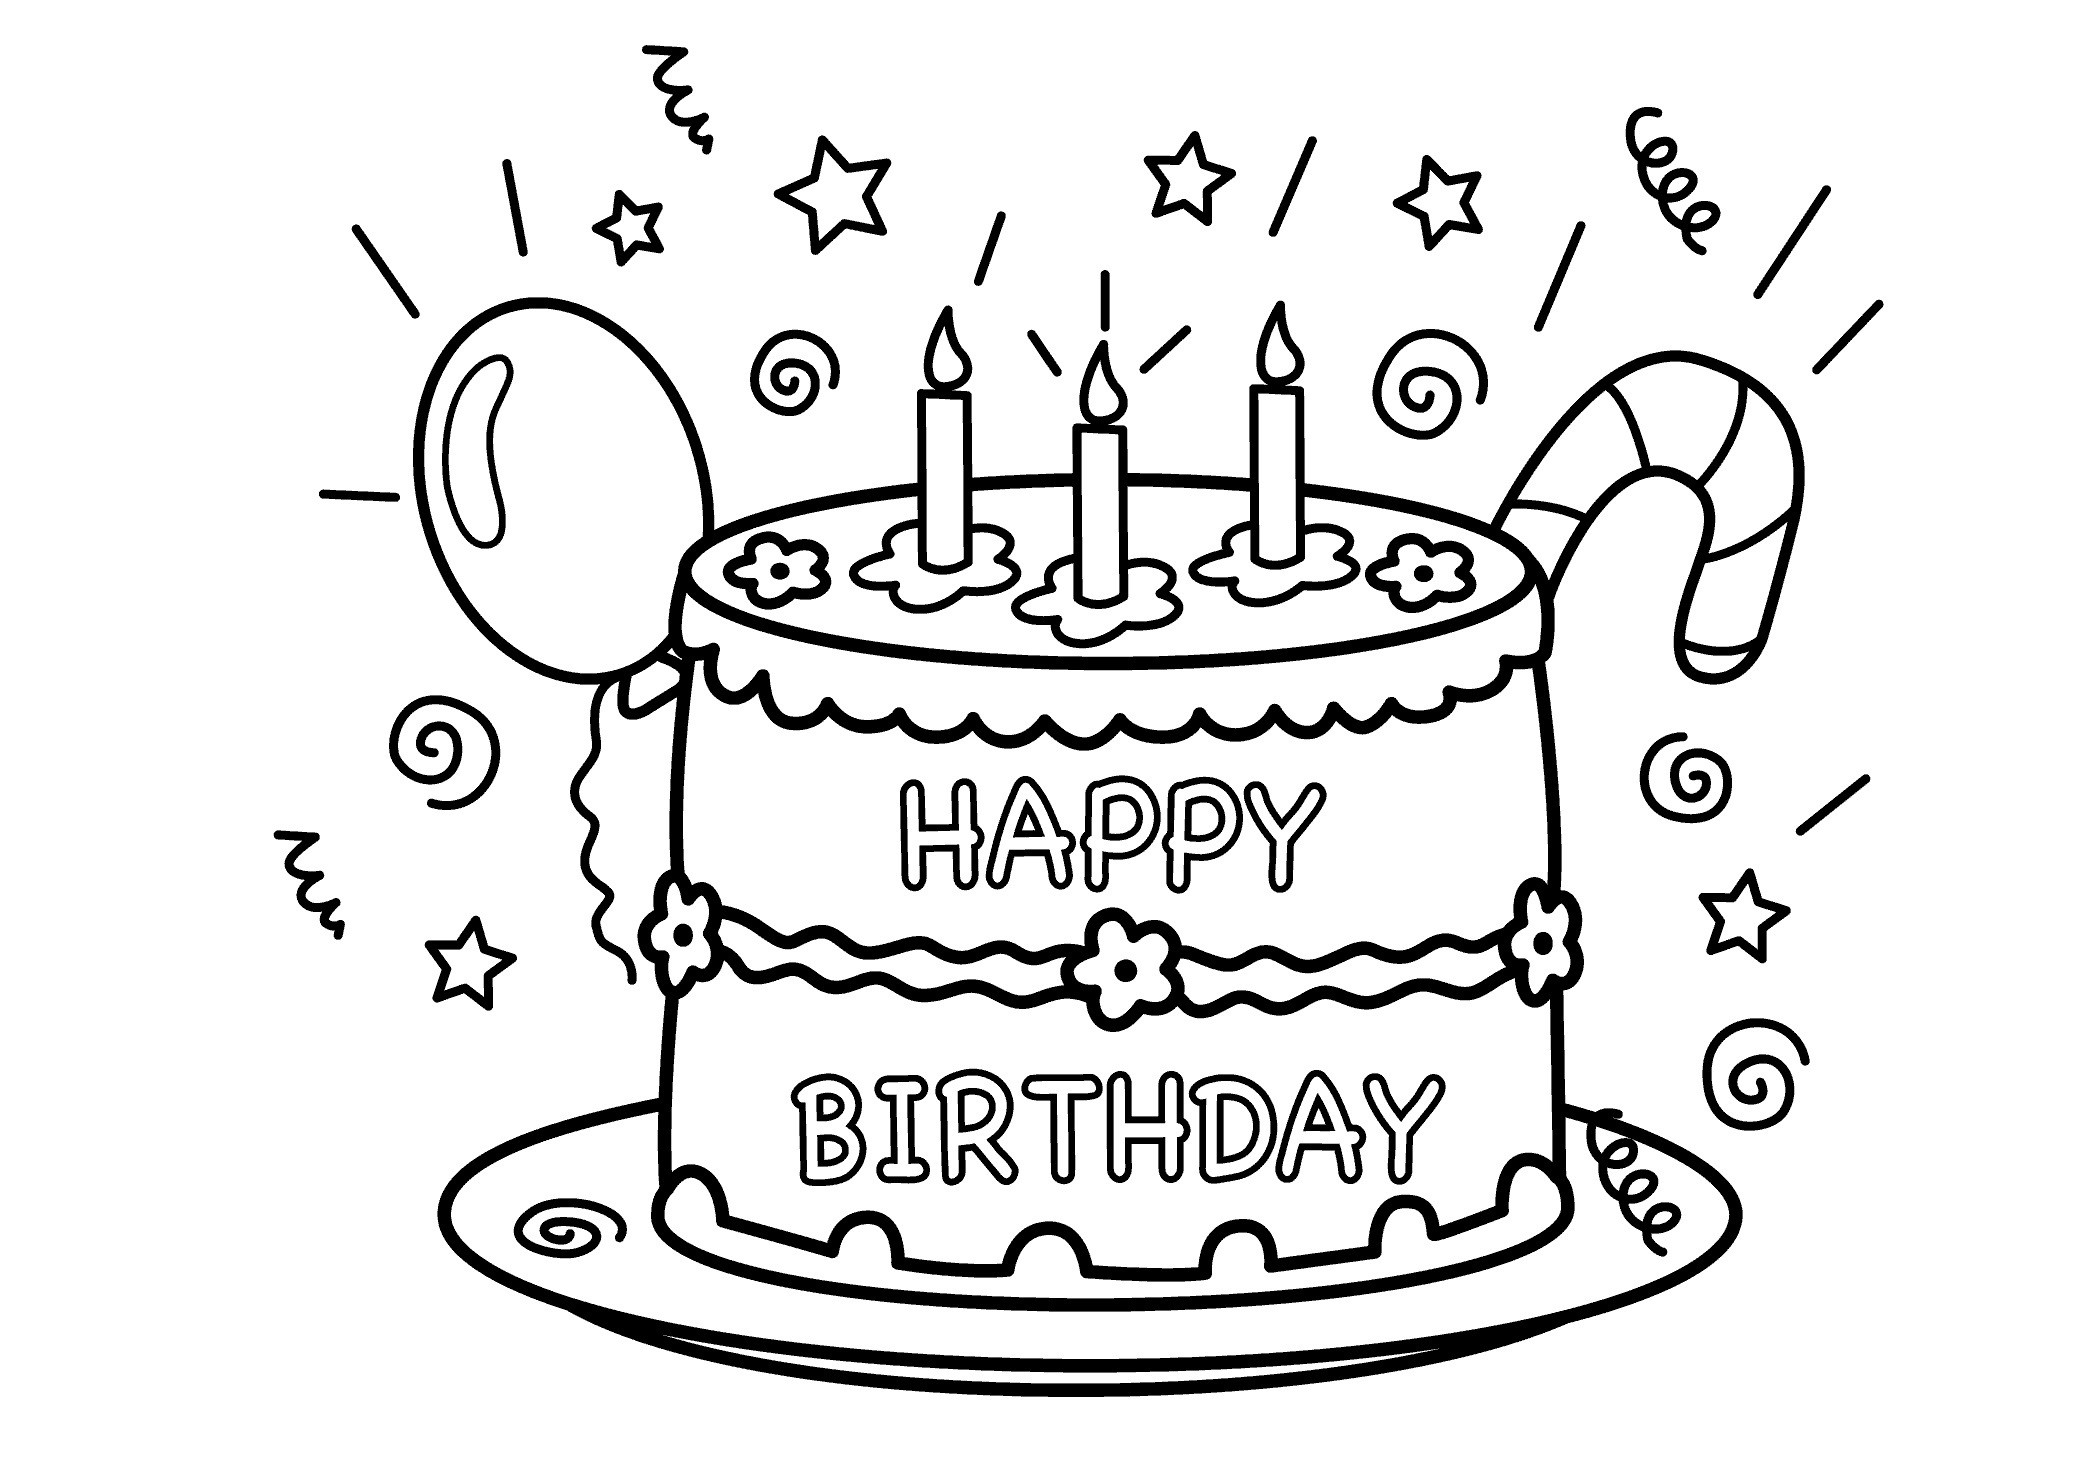 Birthday Cake Coloring Pages Luxury Free Printable Birthday Cake Coloring Pages for Kids